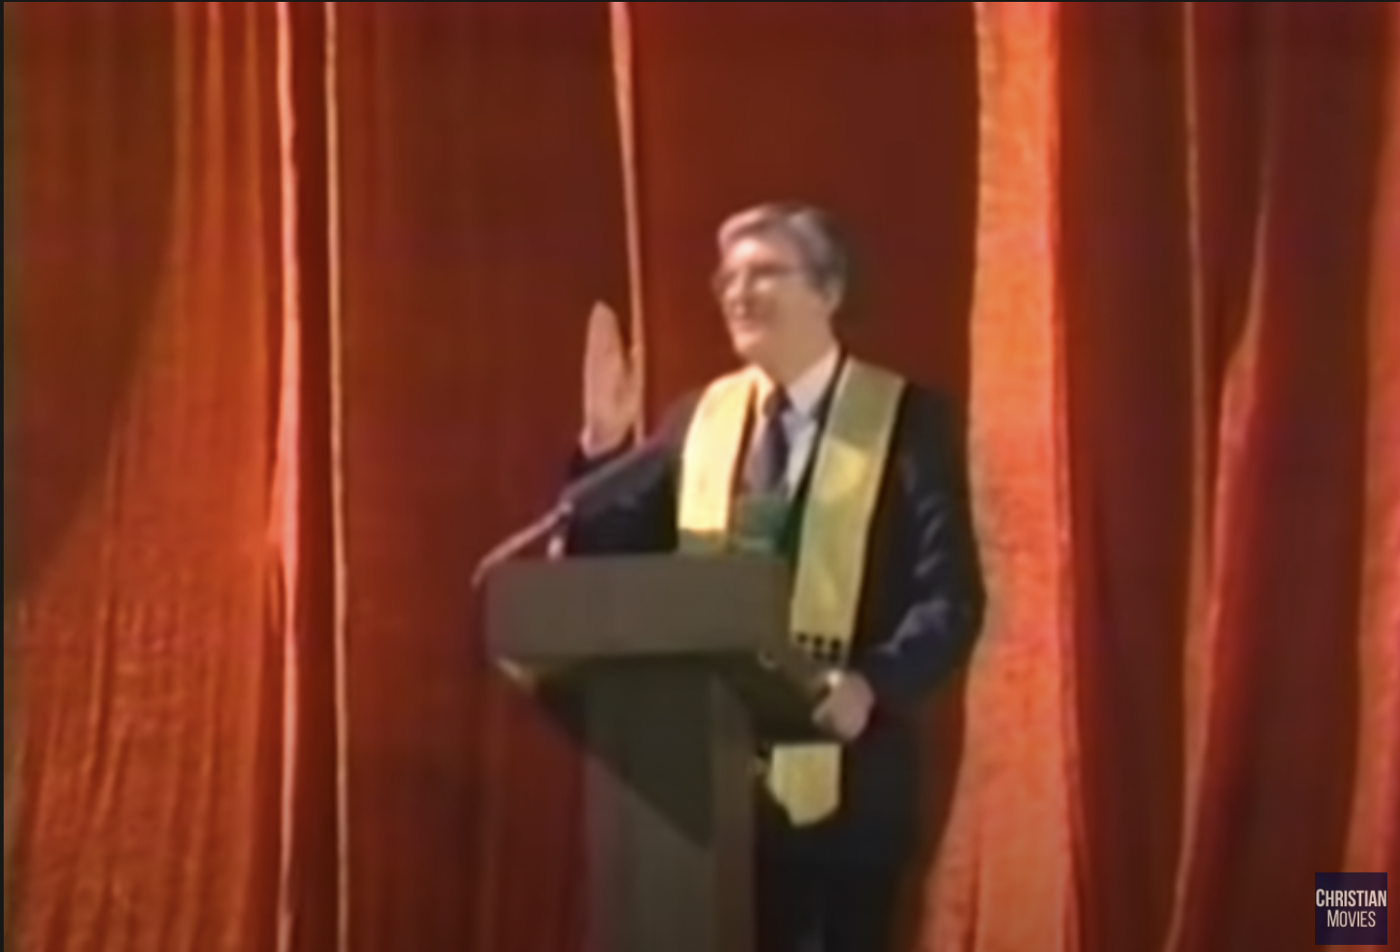 A grey-haired man holding his hand up in front of a lectern. He is wearing a sort of yellow scarf over his dark suit and there are orange-red curtains in the background. 